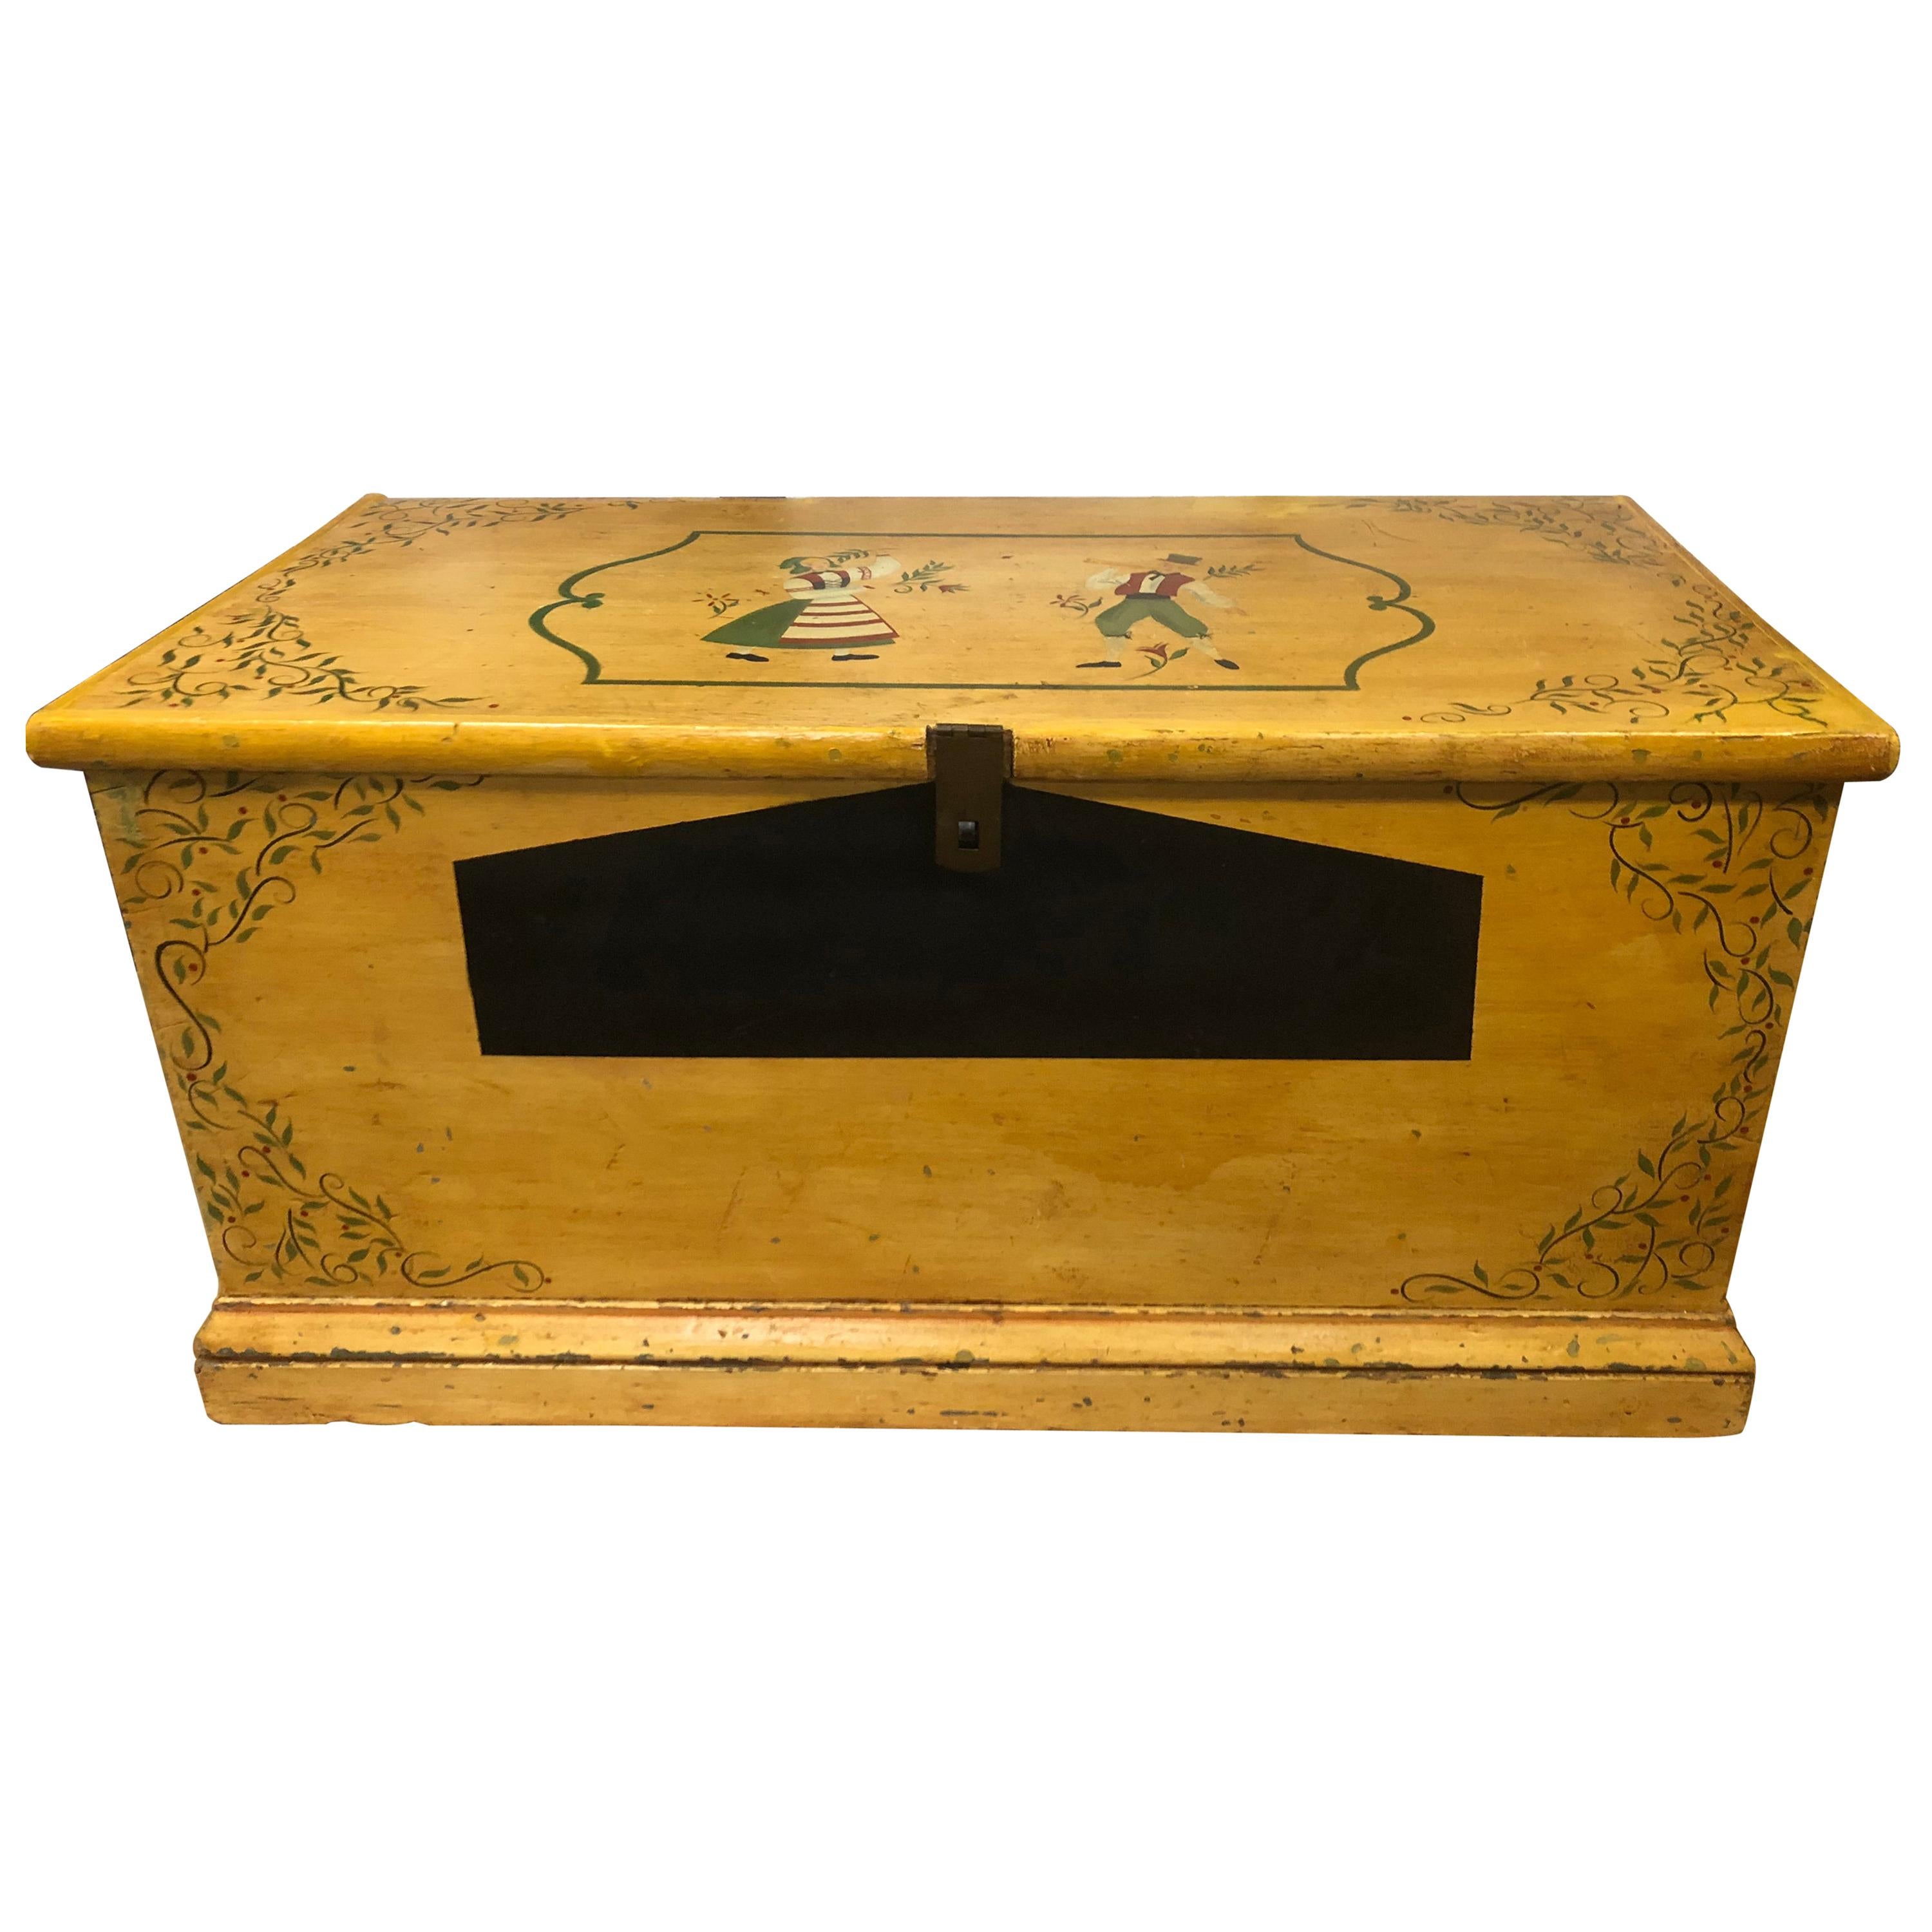 Delightful Antique Painted Hope Chest with Handpainted Dutch Figures For Sale